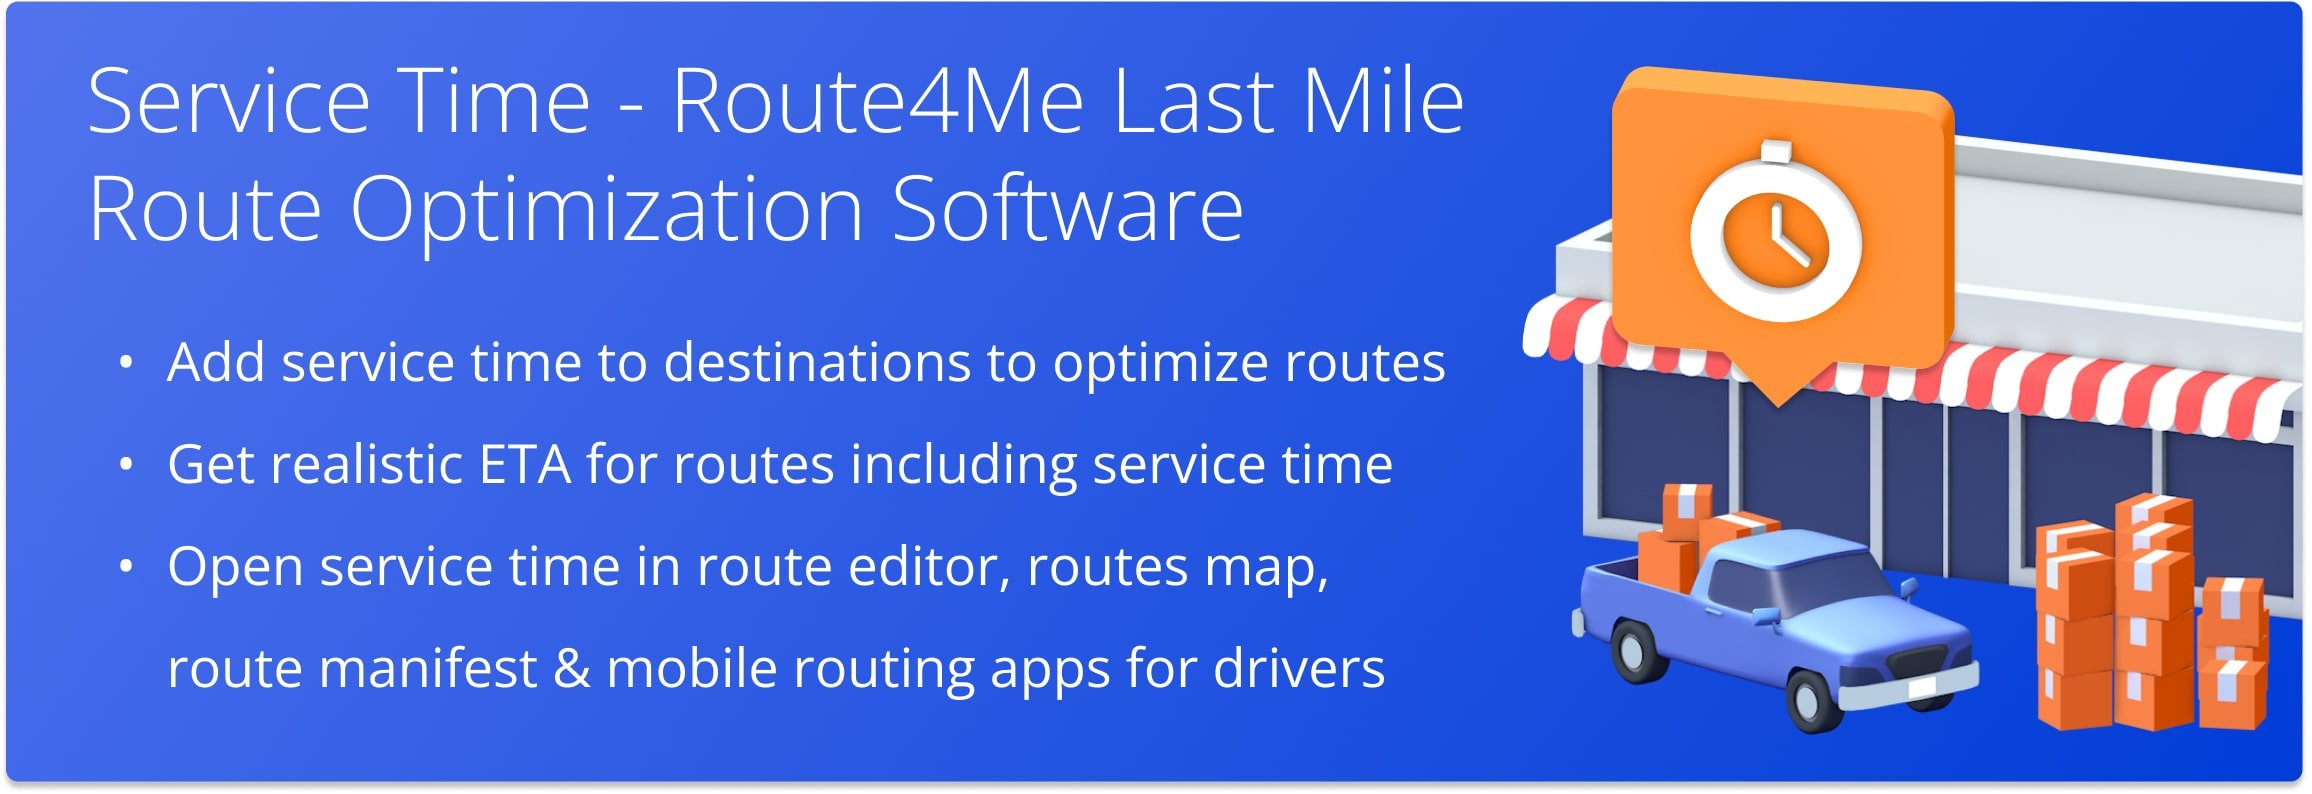 Add Service Time duration to route destinations before planning and optimizing routes to get realistic ETAs.